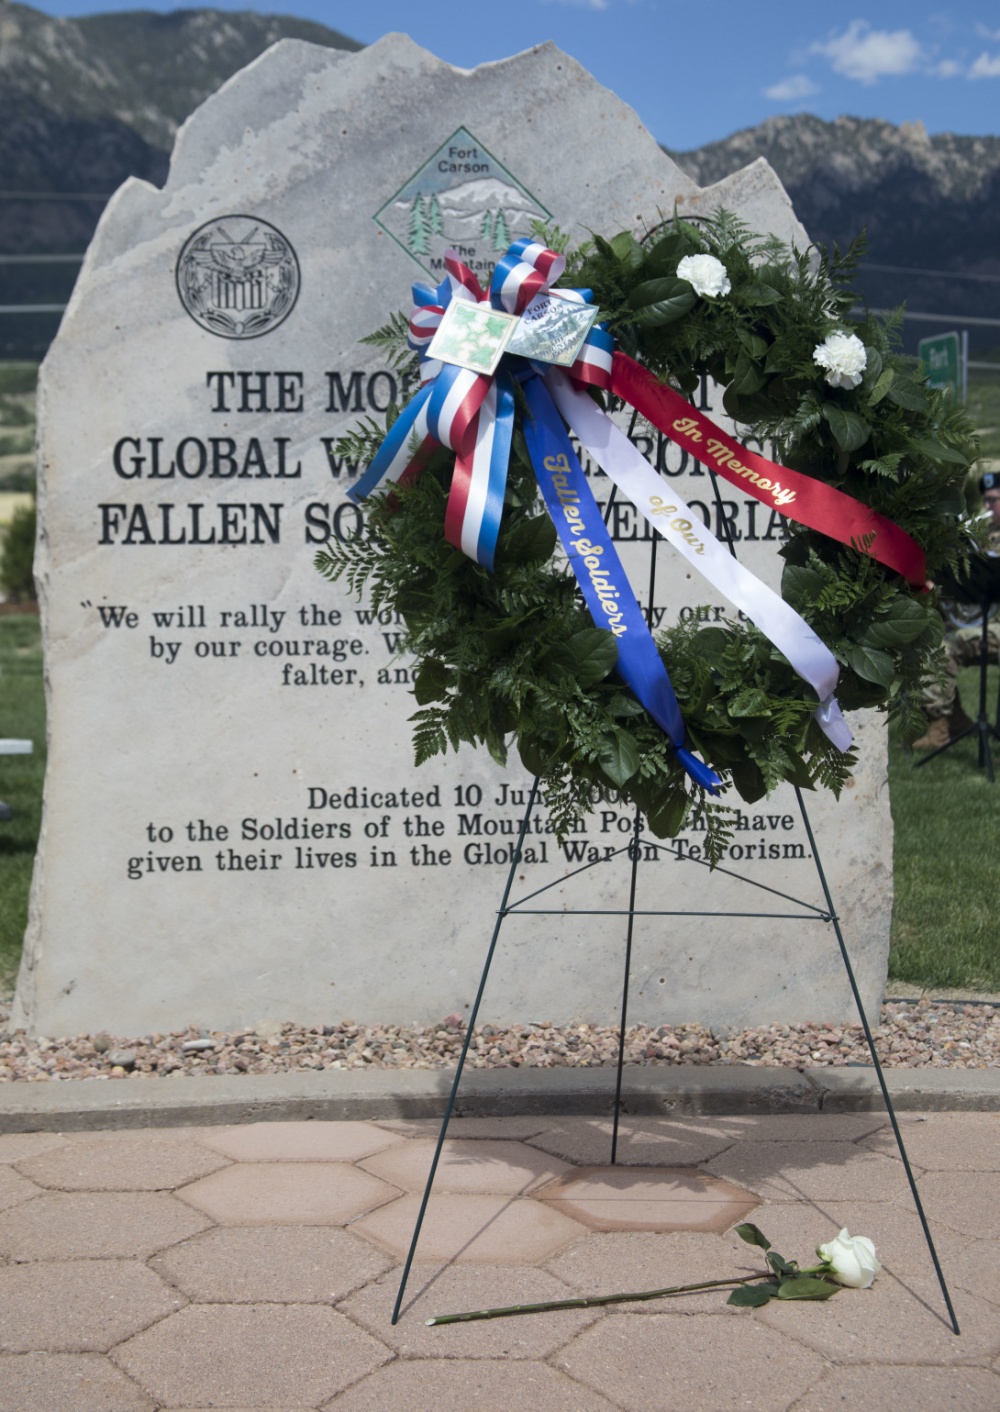 A memorial wreath with two carnations symbolizing Sgt. 1st Class Stephen B. Cribben and Sgt. 1st Class Mihail Golin, two Green Berets assigned to 10th Special Forces Group (Airborne) who were killed in action during operations in Afghanistan, stands in front of the central stone of The Mountain Post Global War on Terrorism Fallen Soldiers Memorial following the Mountain Post Warrior Memorial Ceremony at Fort Carson, Colorado, on May 24, 2018. The annual ceremony serves to honor the memories of Fort Carson Soldiers who’ve lost their lives in operations overseas. (Courtesy of U.S. Army by Sgt. Justin Smith)